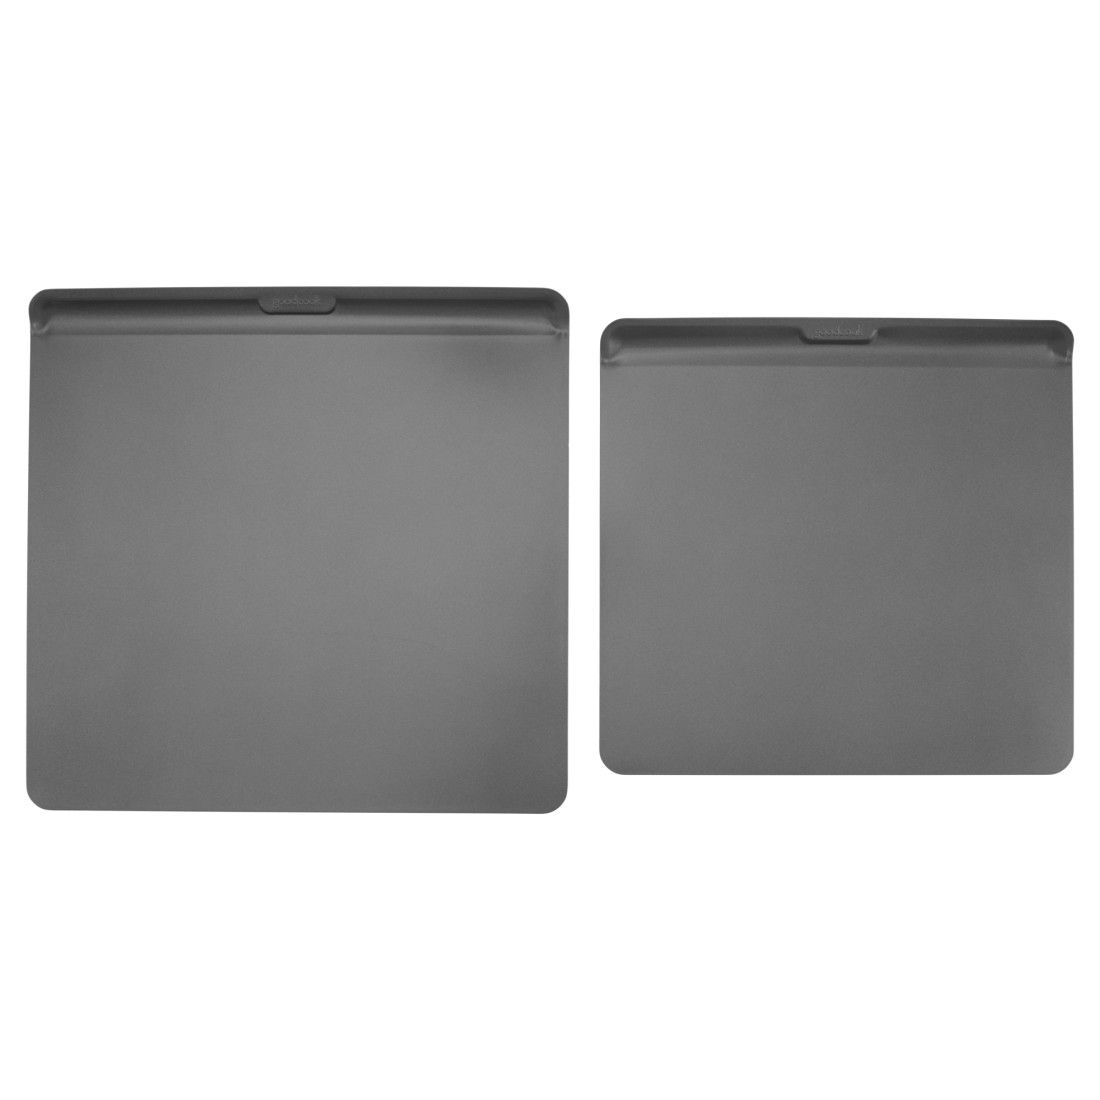 Goodful Nonstick Cookie Baking Sheet Set, Heavy Duty Carbon Steel with Quick Release Coating, Made Without PFOA, Dishwasher Safe, 2-Pack Bakeware